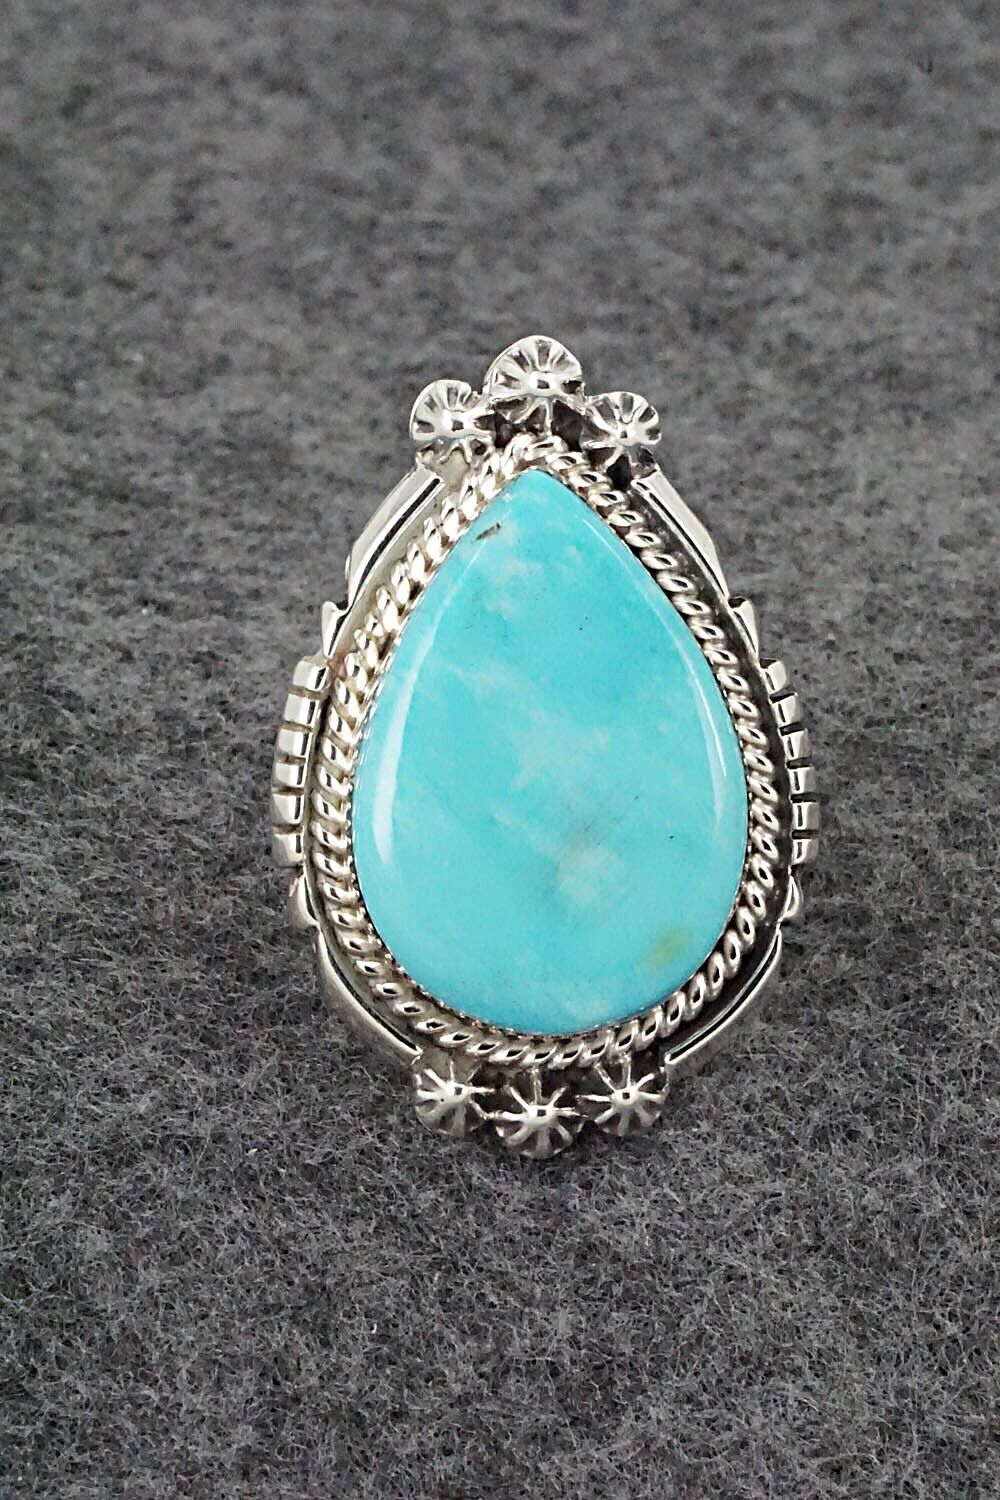 Turquoise & Sterling Silver Ring - Andrew Vandever - Size 9